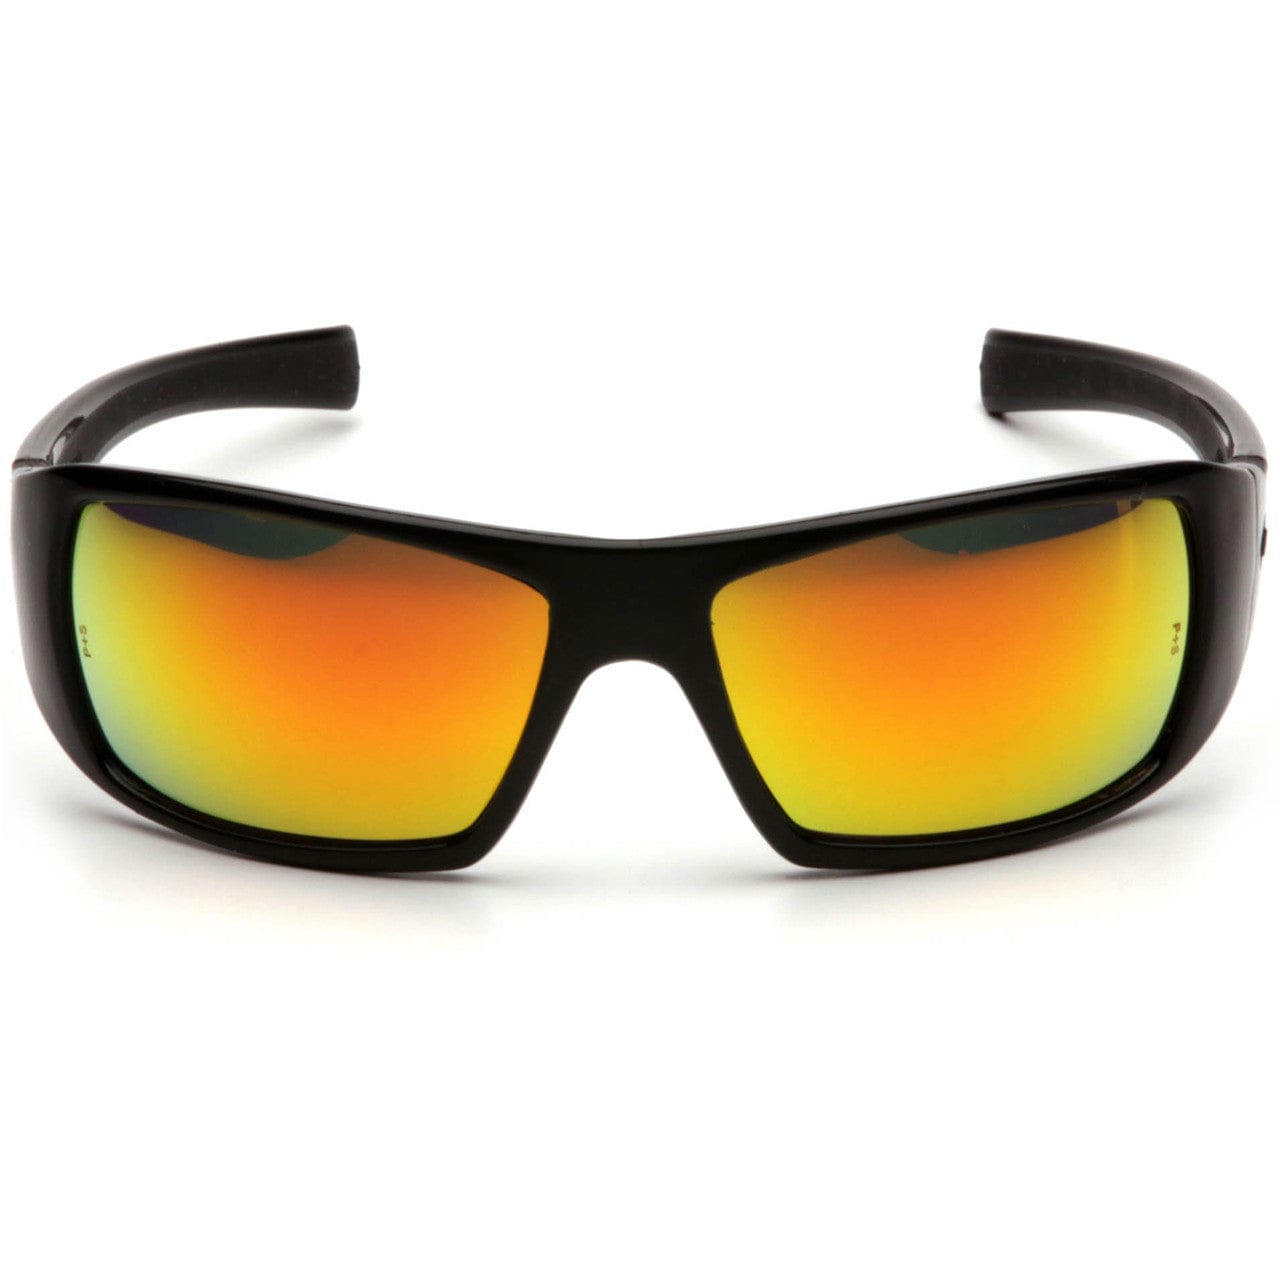 Pyramex Goliath Safety Glasses with Black Frame and Ice Orange Mirror Lens SB5645D Front View